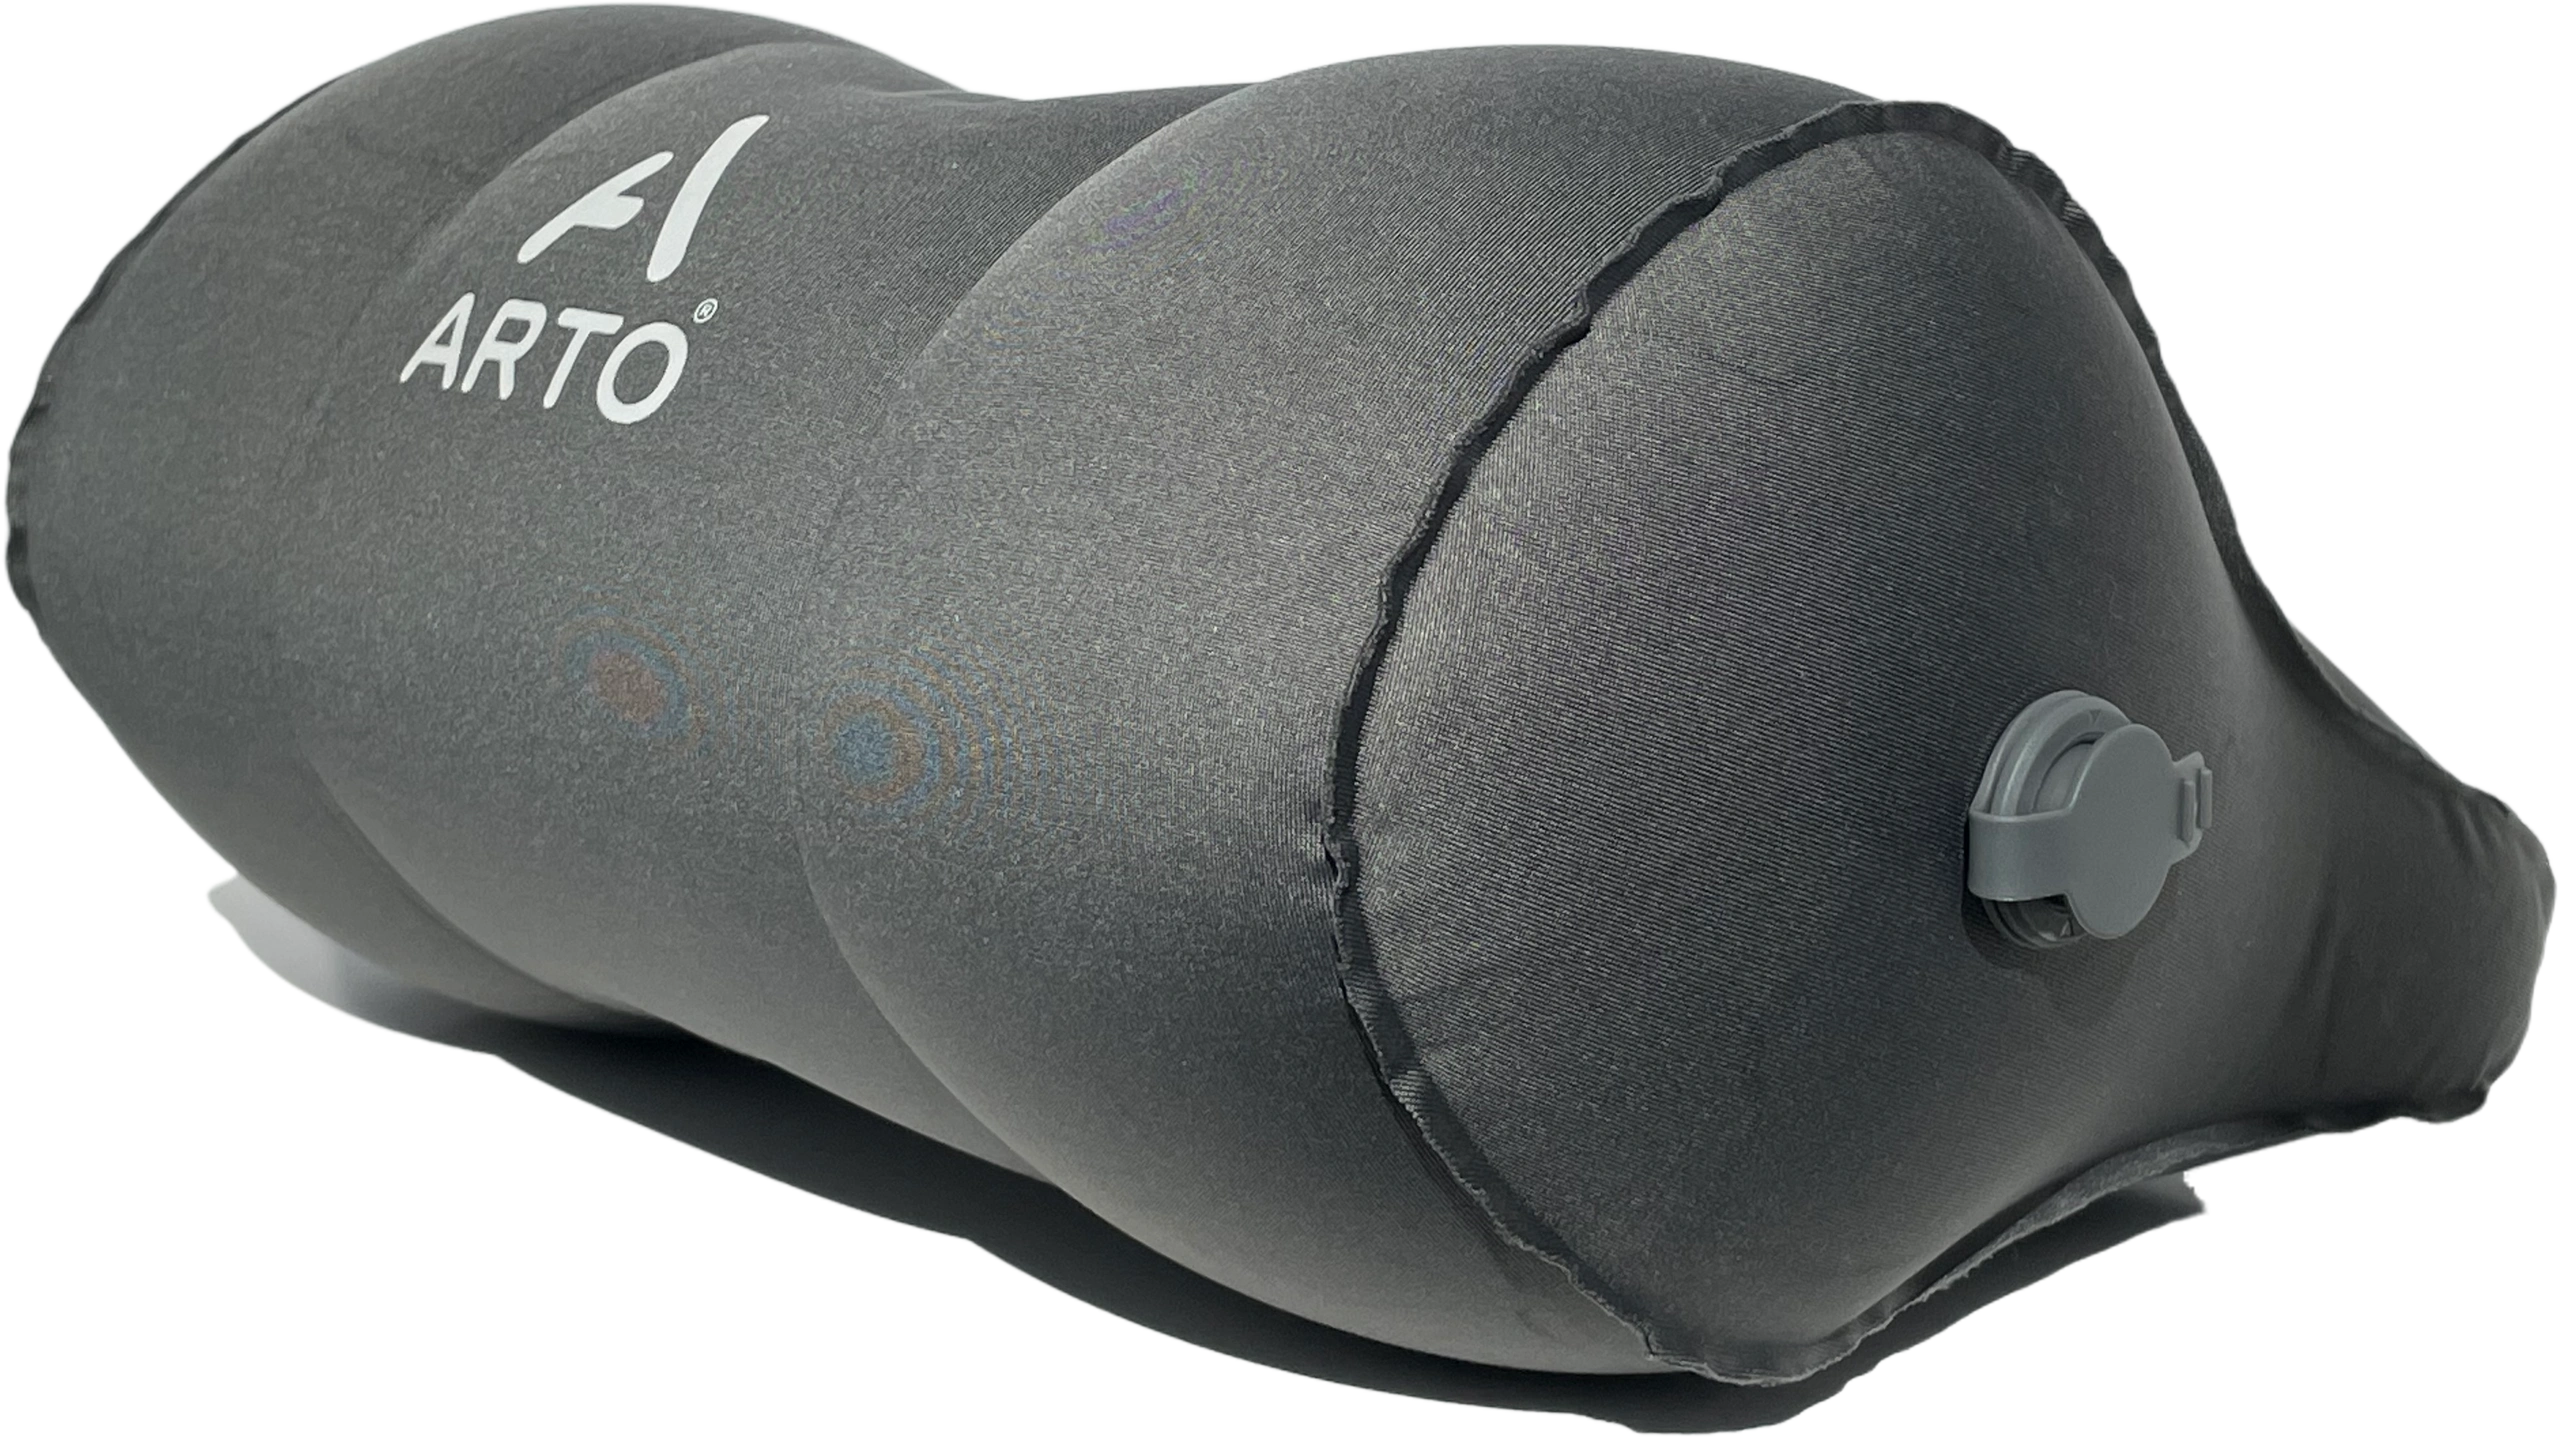 The Arto Pillow - Inflatable lying flat, showing it's teardrop design. 